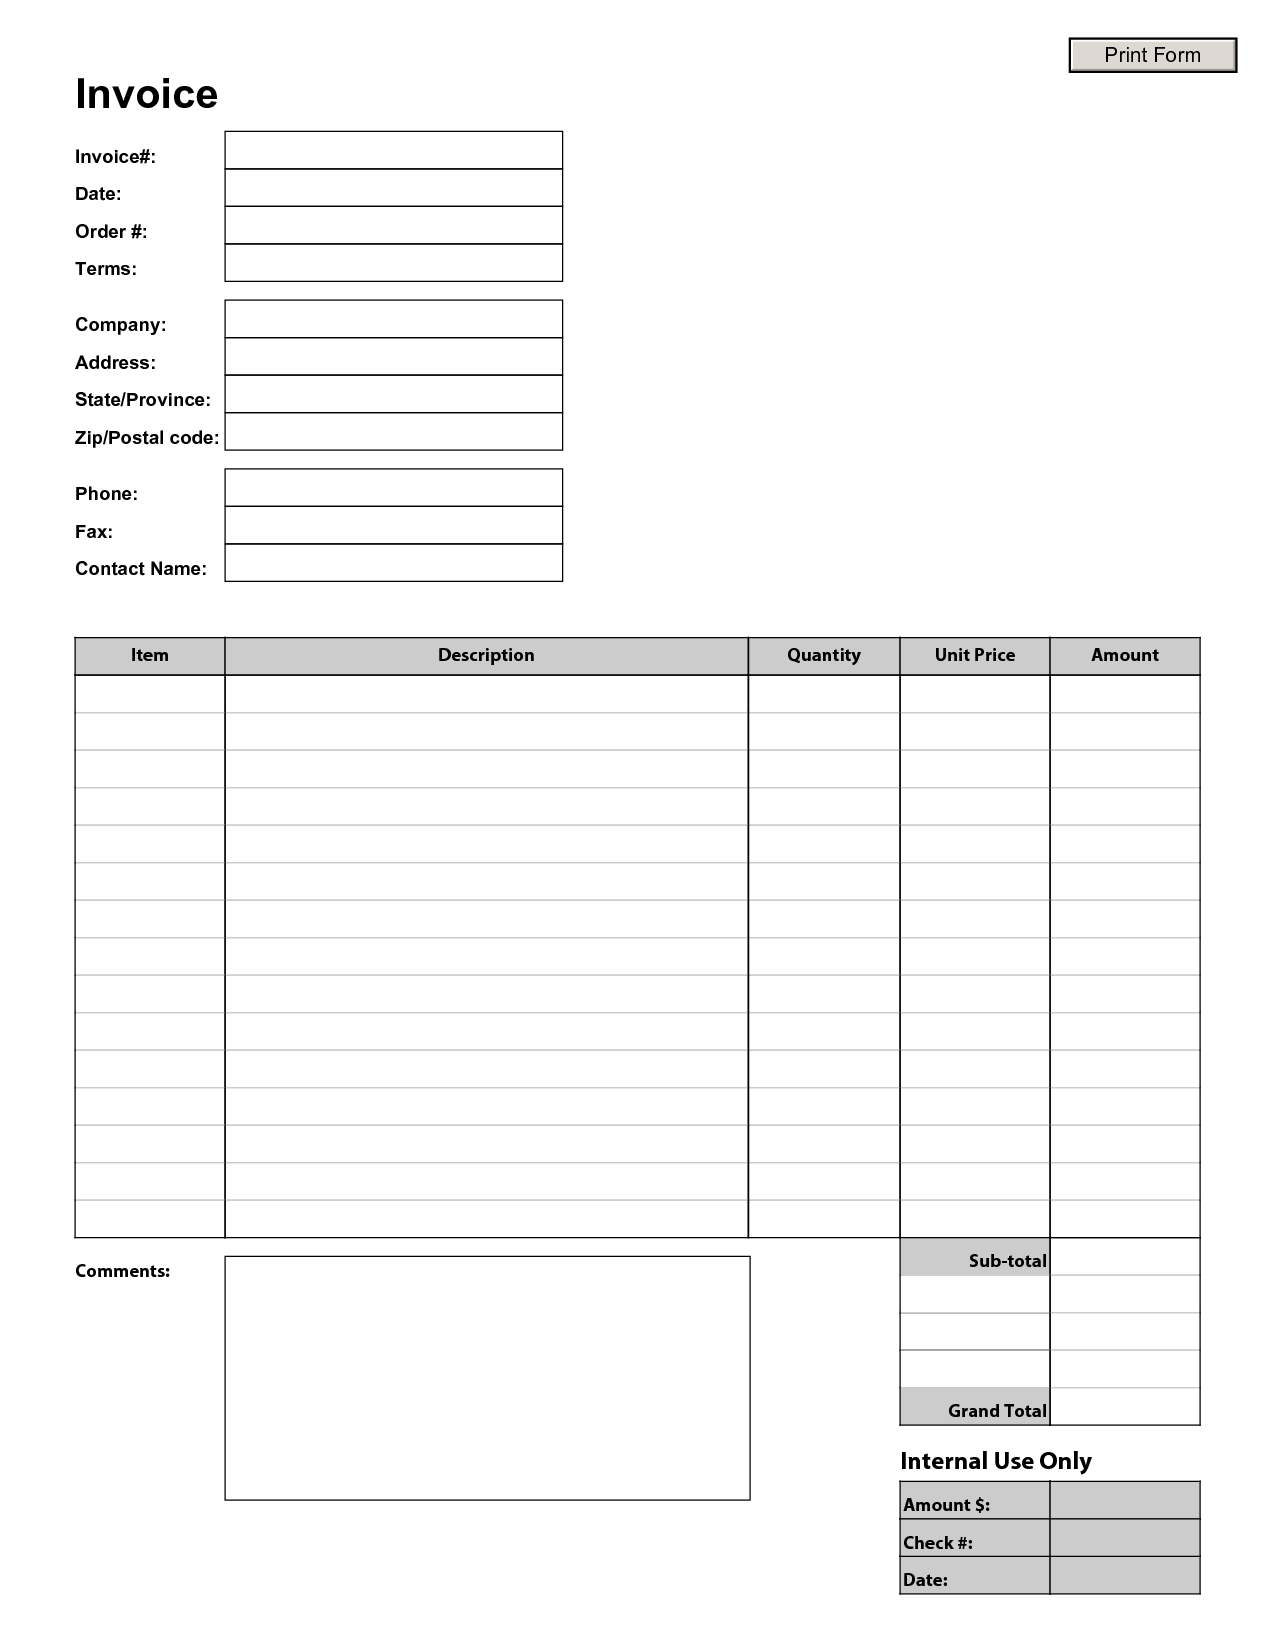 blank invoice printable resume examples fast food manager printable blank invoice forms